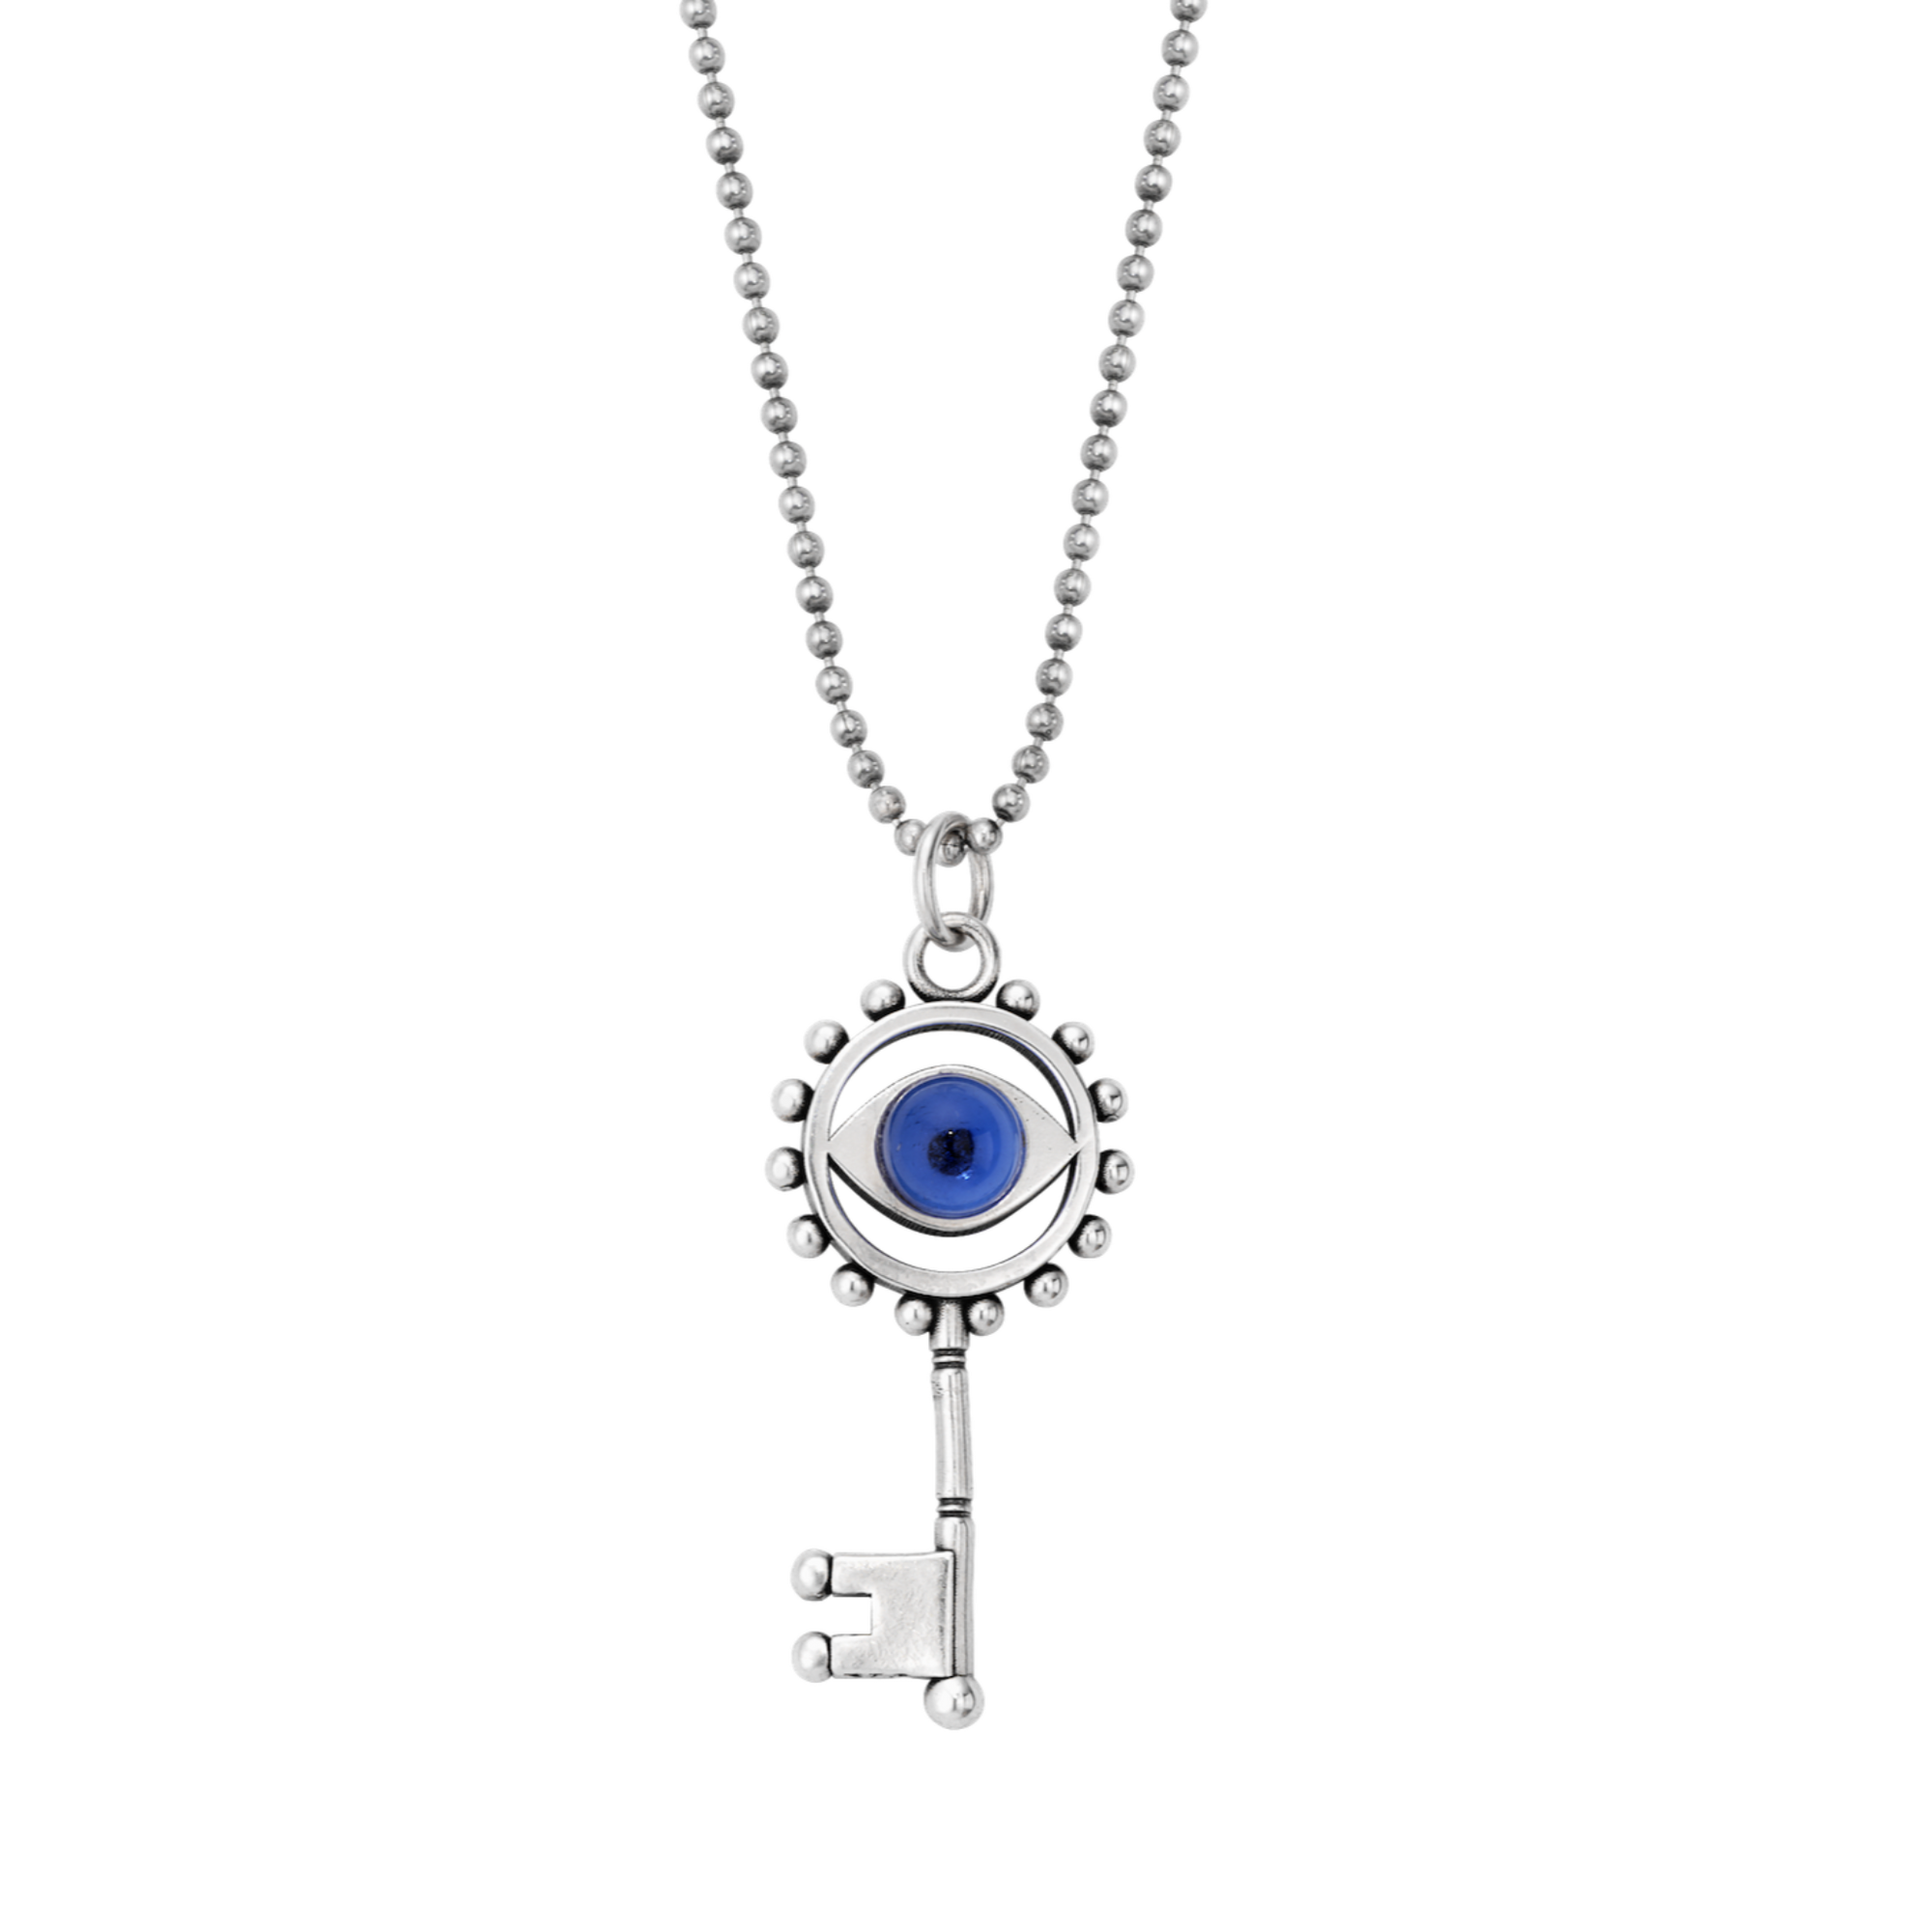 Buy Evil Eye Necklace invisible Necklace Floating Illusion Necklace jewelry  transparent Necklace handmade Jewelryprotection Online in India 